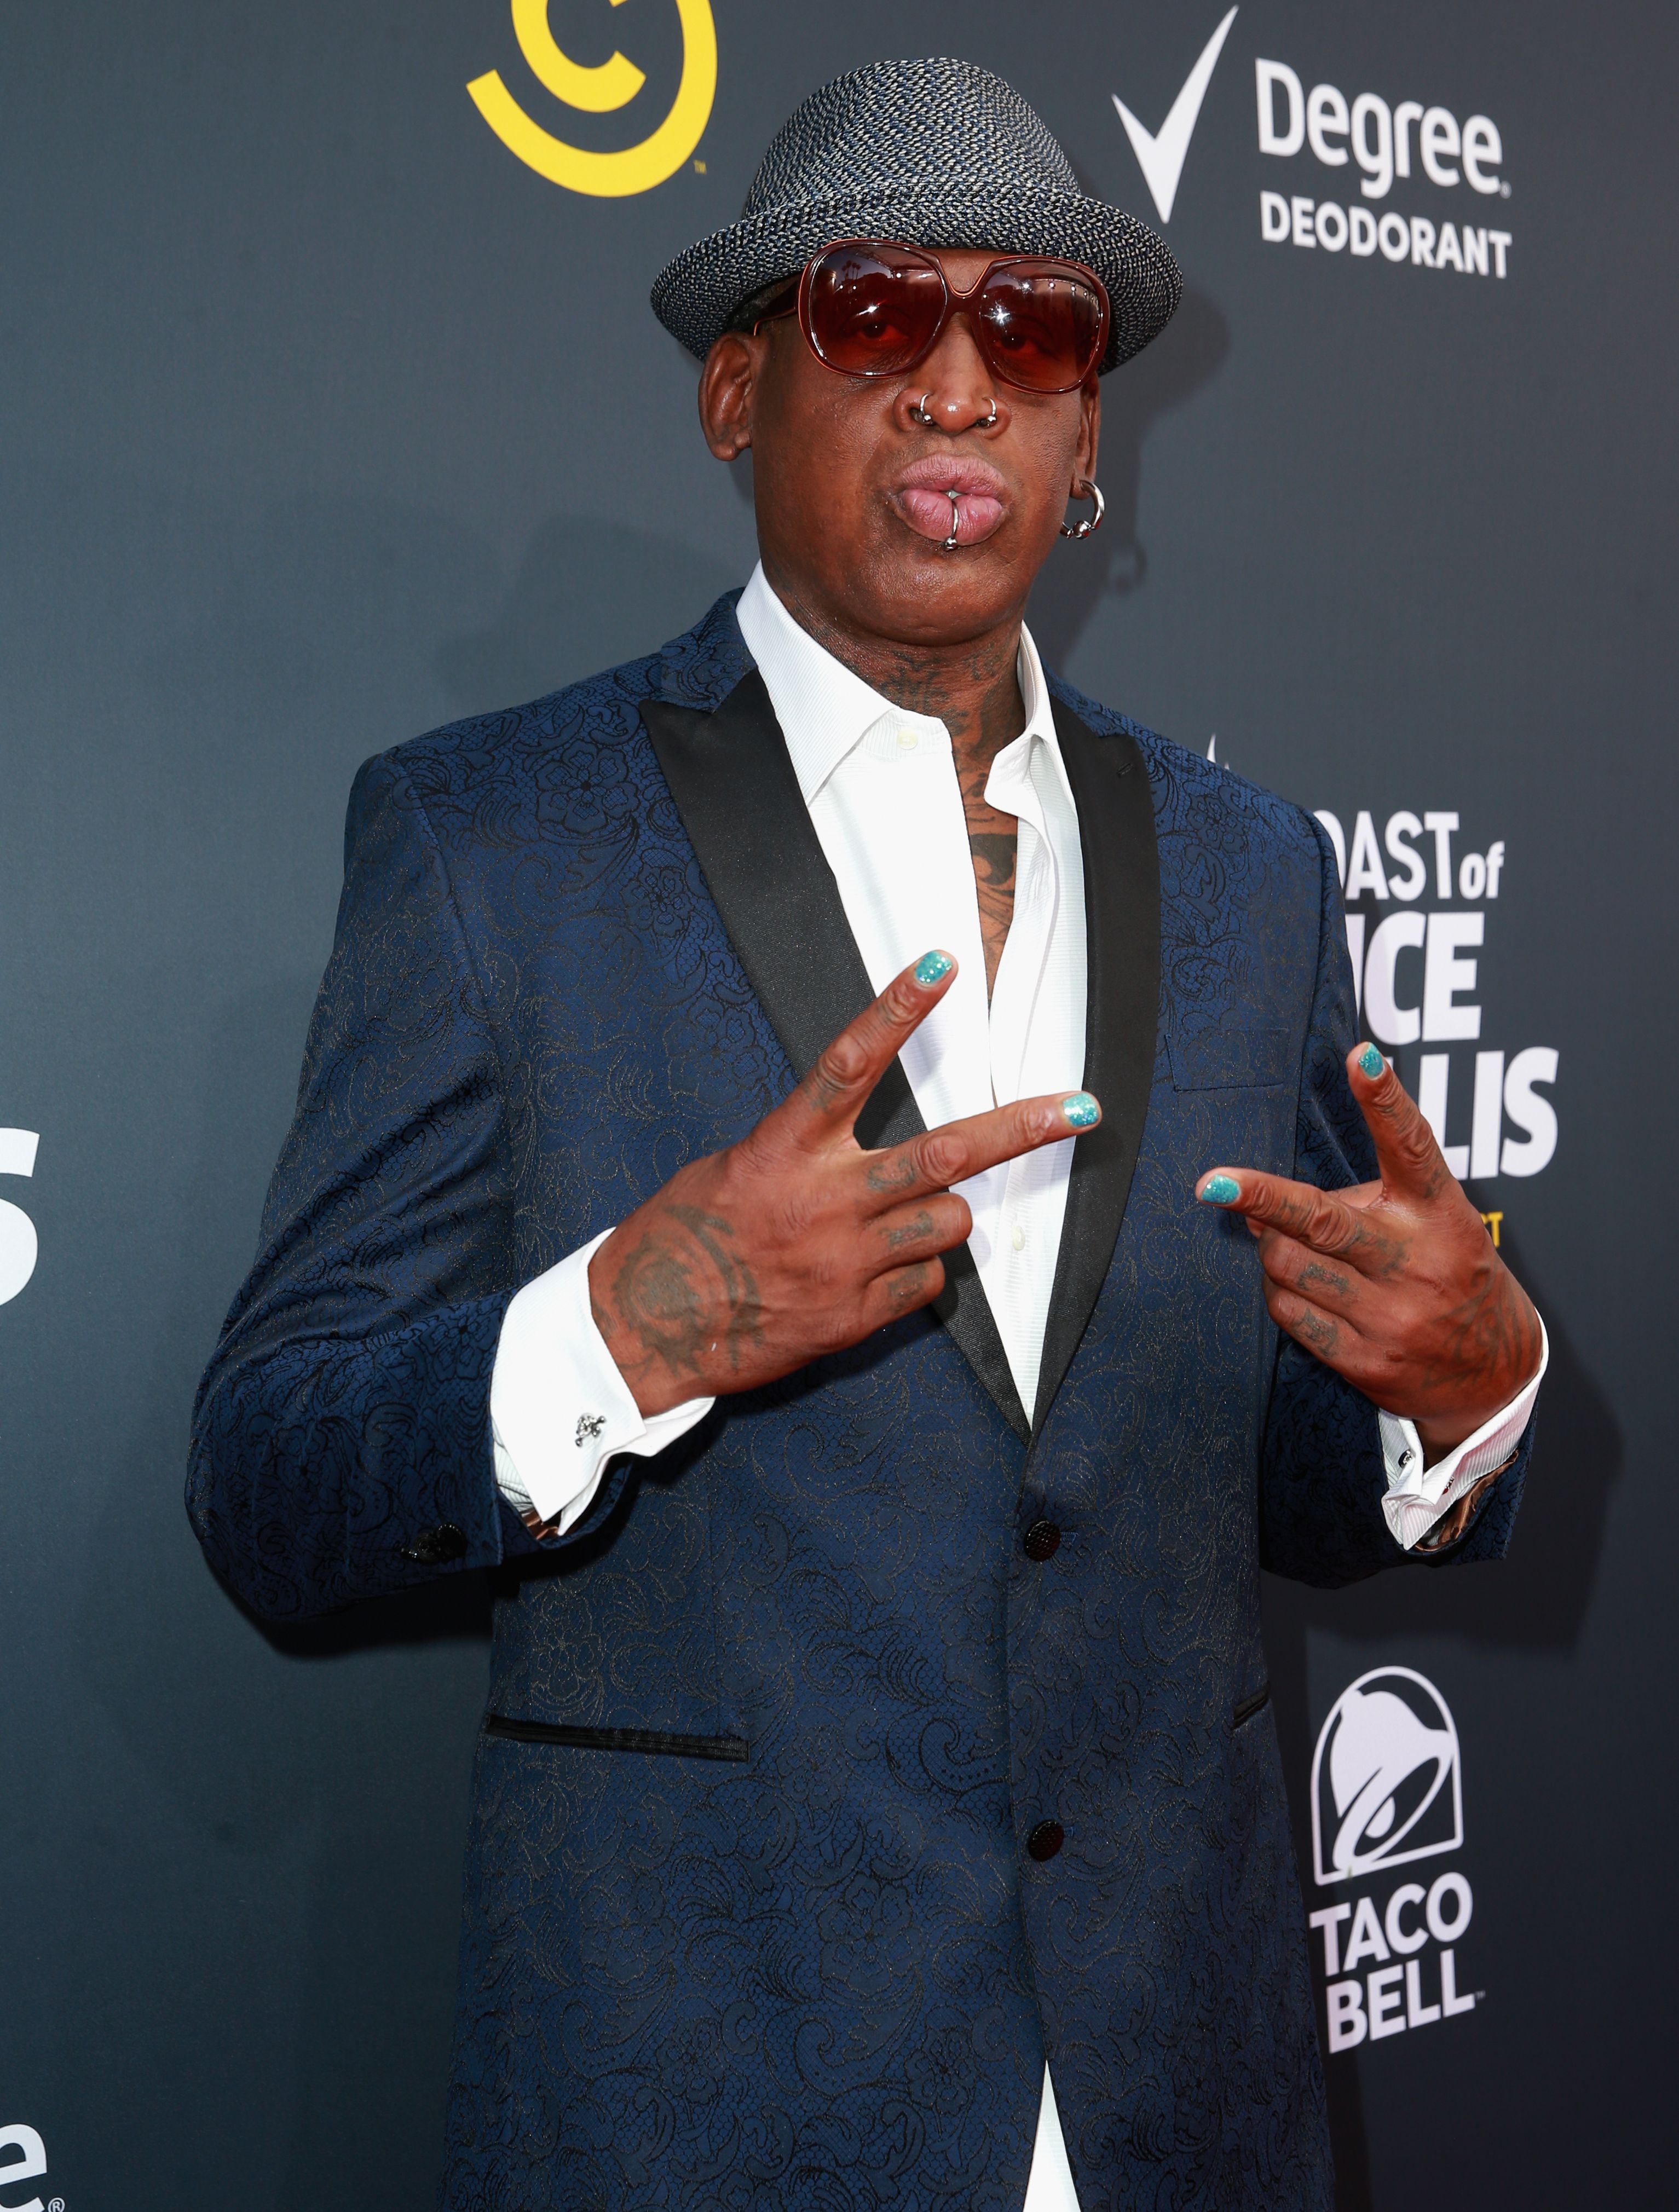 Dennis Rodman attends the Comedy Central Roast of Bruce Willis at Hollywood Palladium on July 14, 2018 in Los Angeles, California. | Source: Getty Images